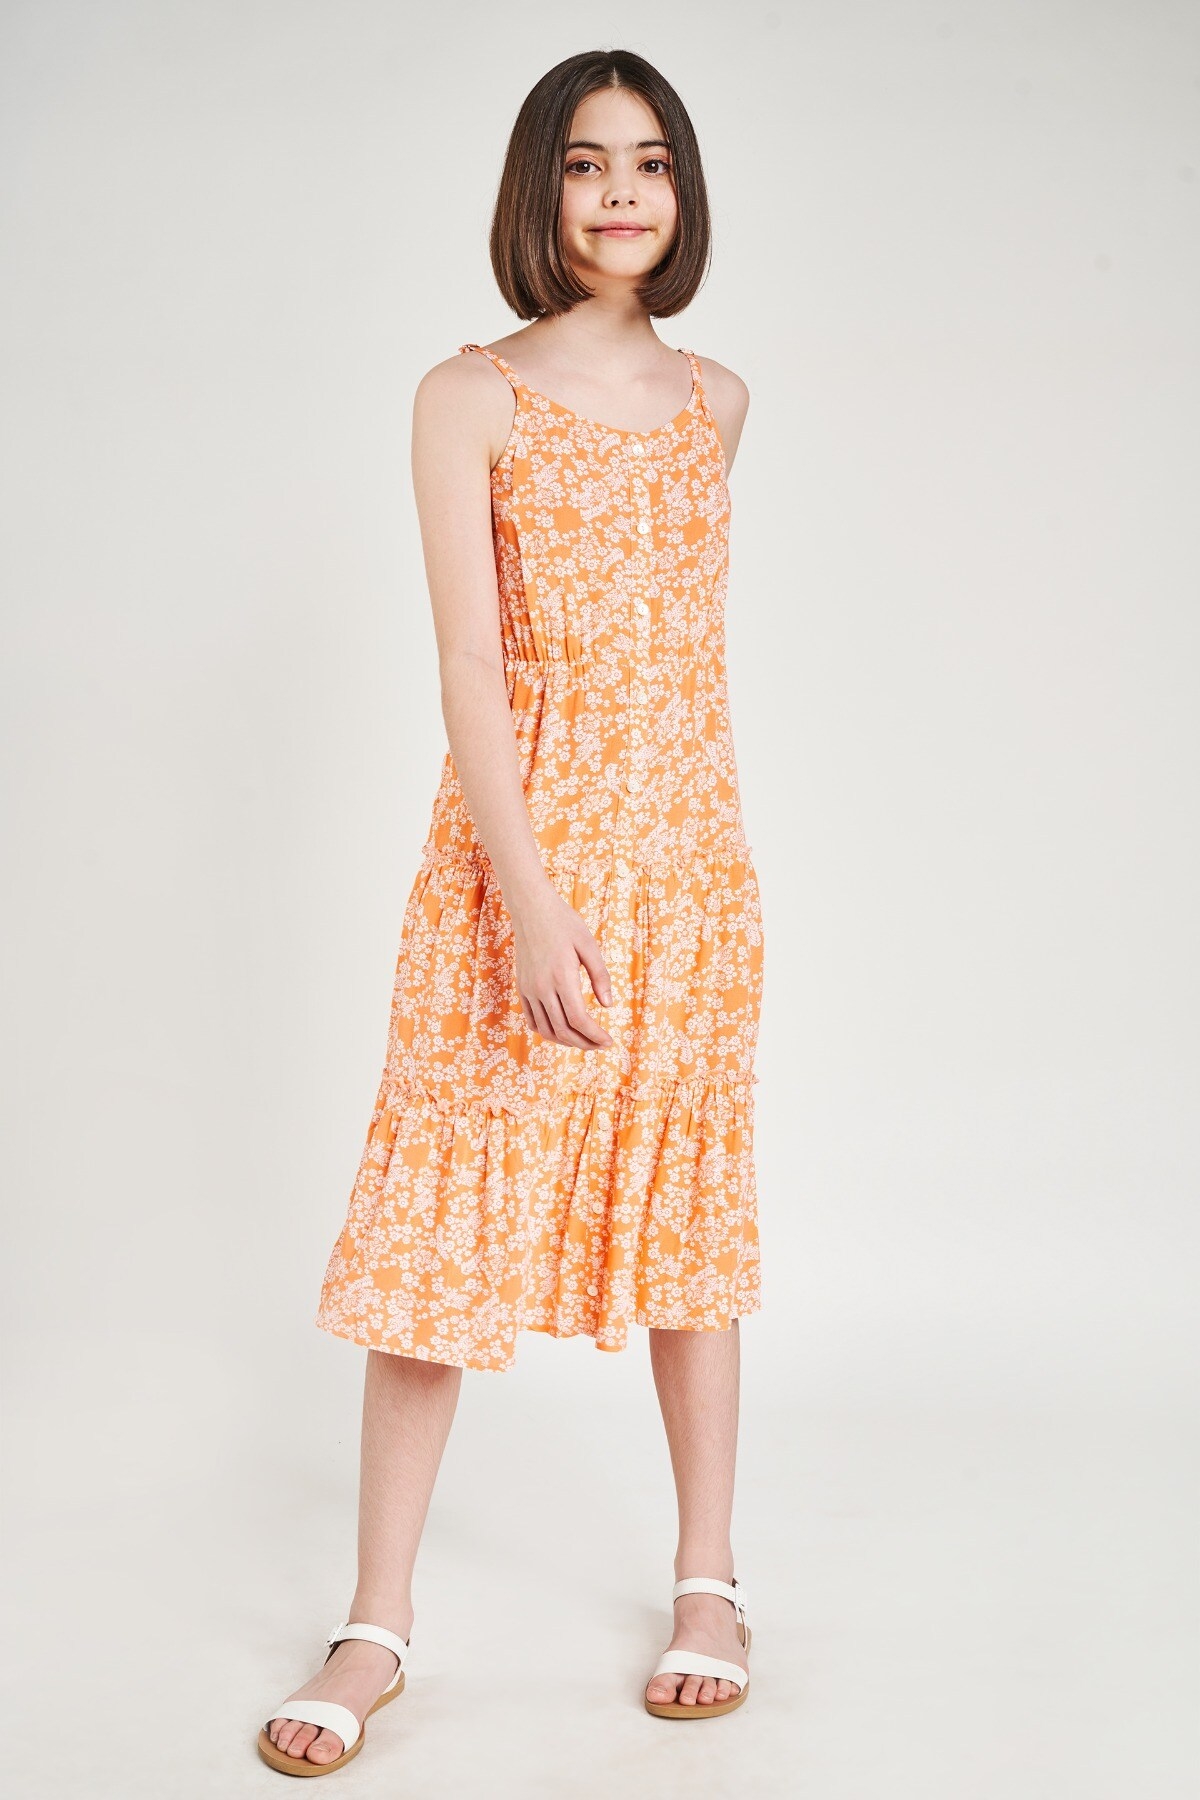 AND | Orange Floral Printed Fit And Flare Dress 5